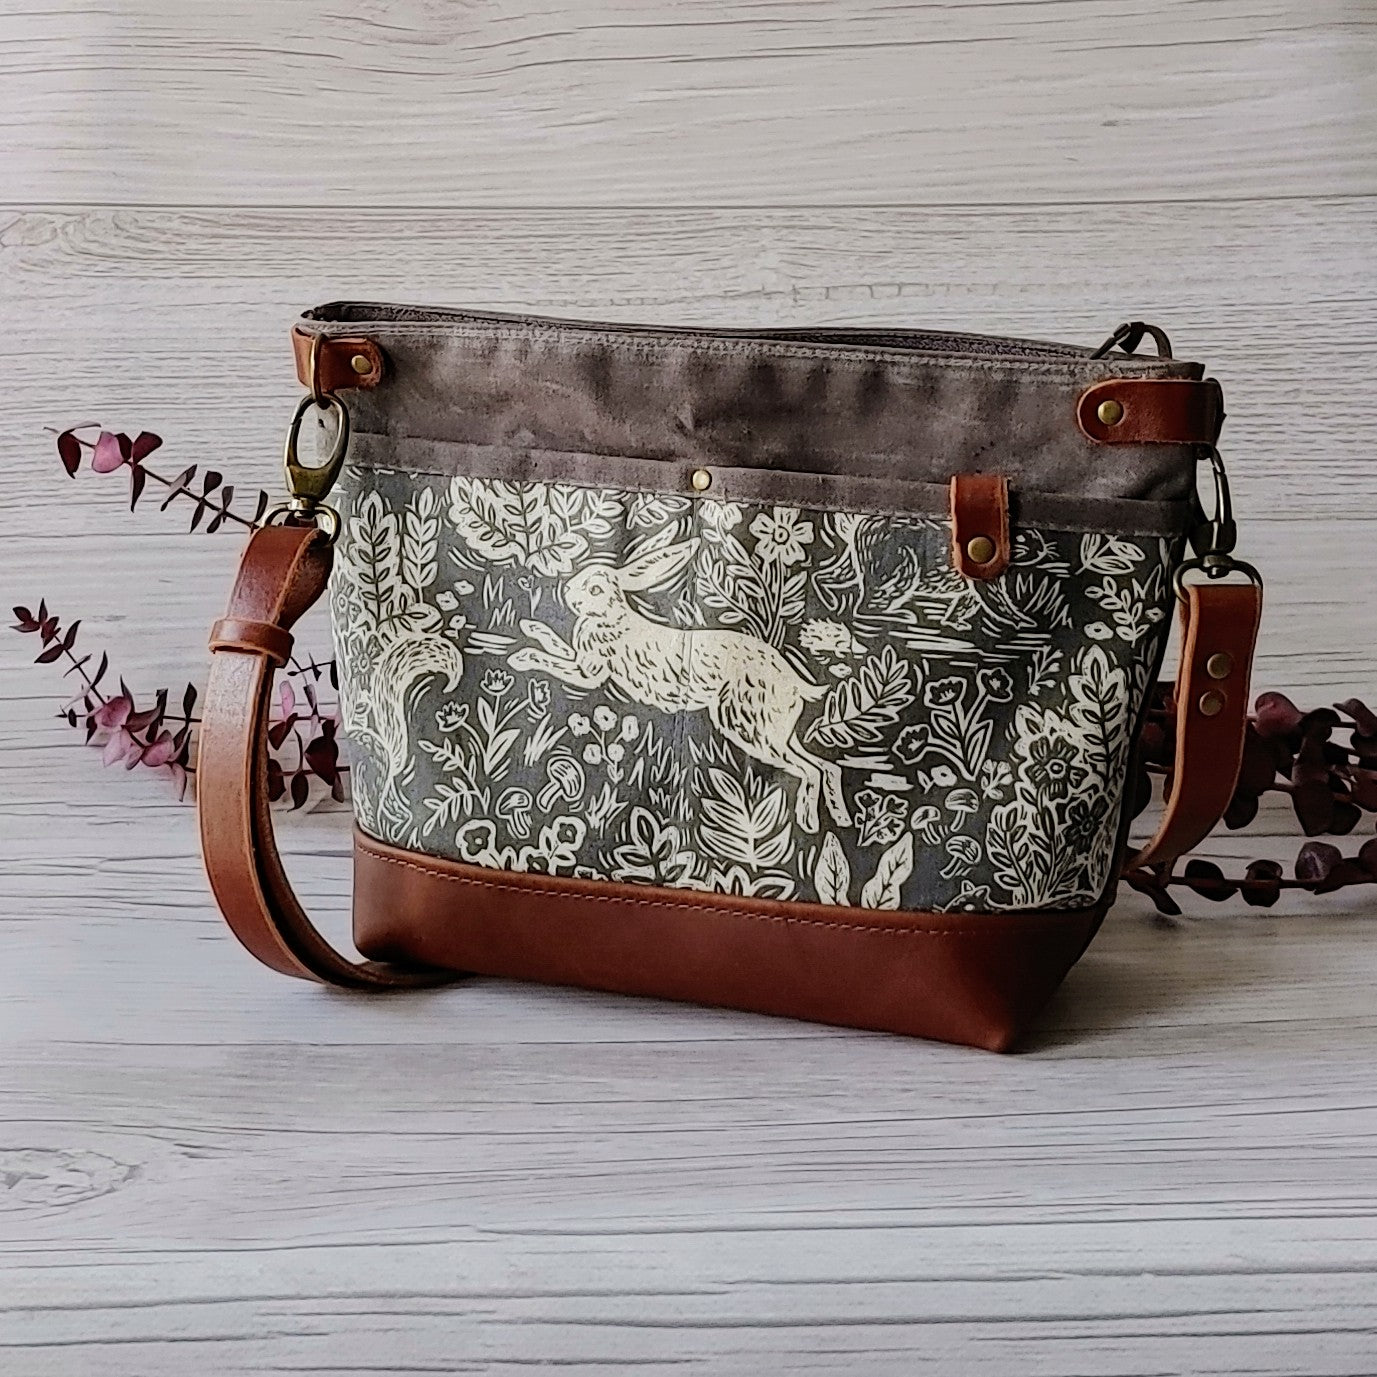 Starling Handbag in Fable Bunny Canvas with Leather and Waxed Canvas